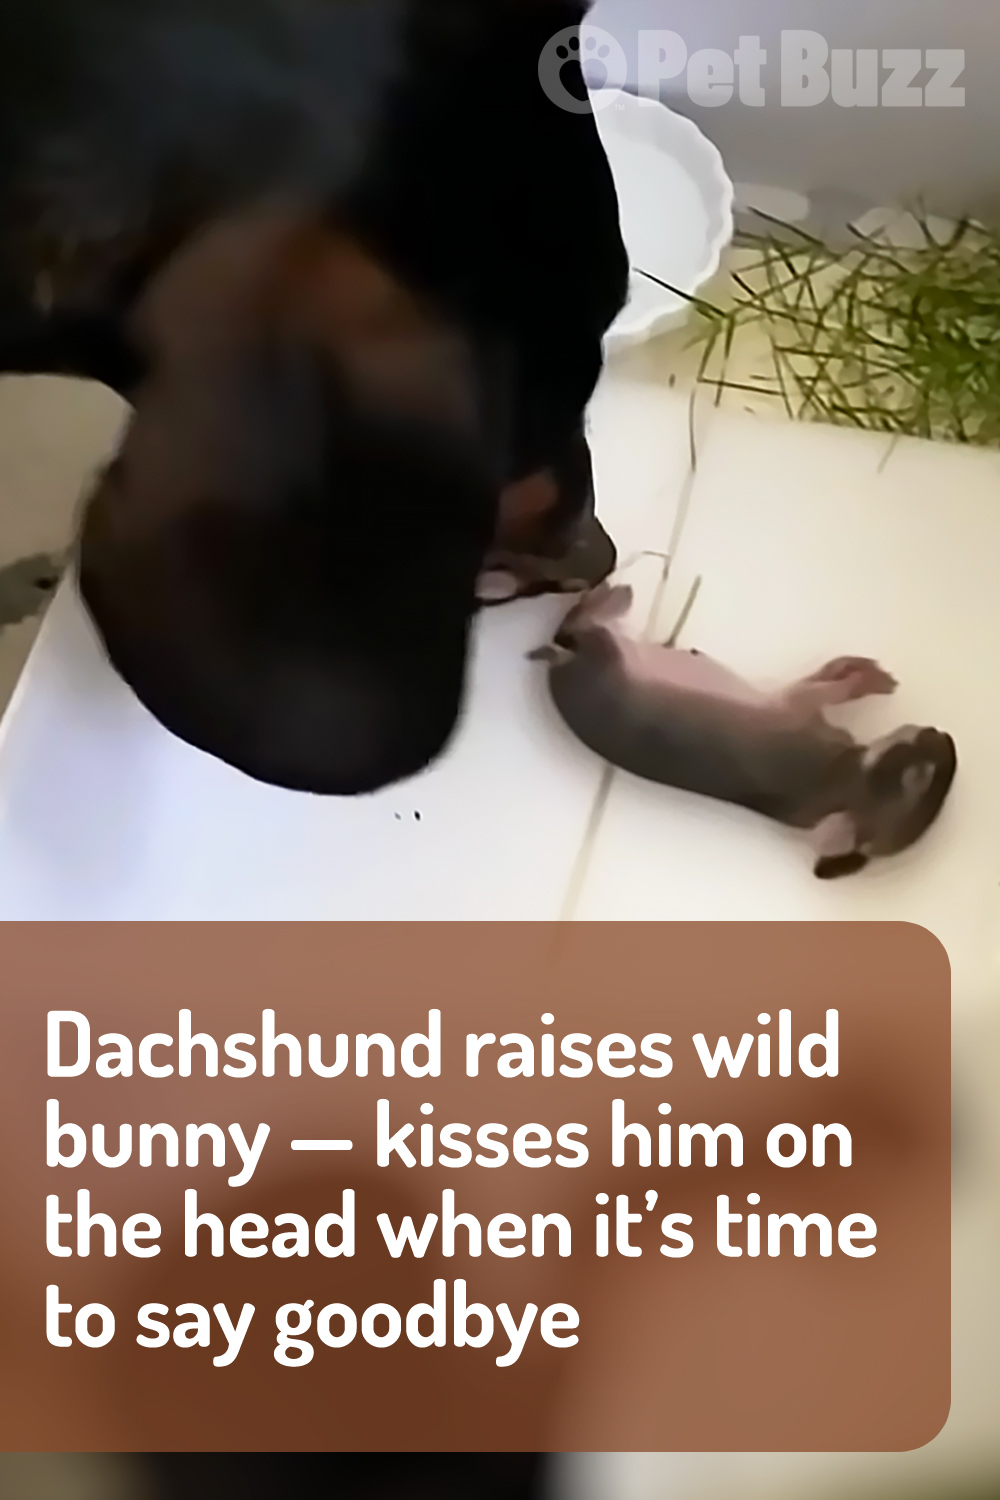 Dachshund raises wild bunny — kisses him on the head when it’s time to say goodbye